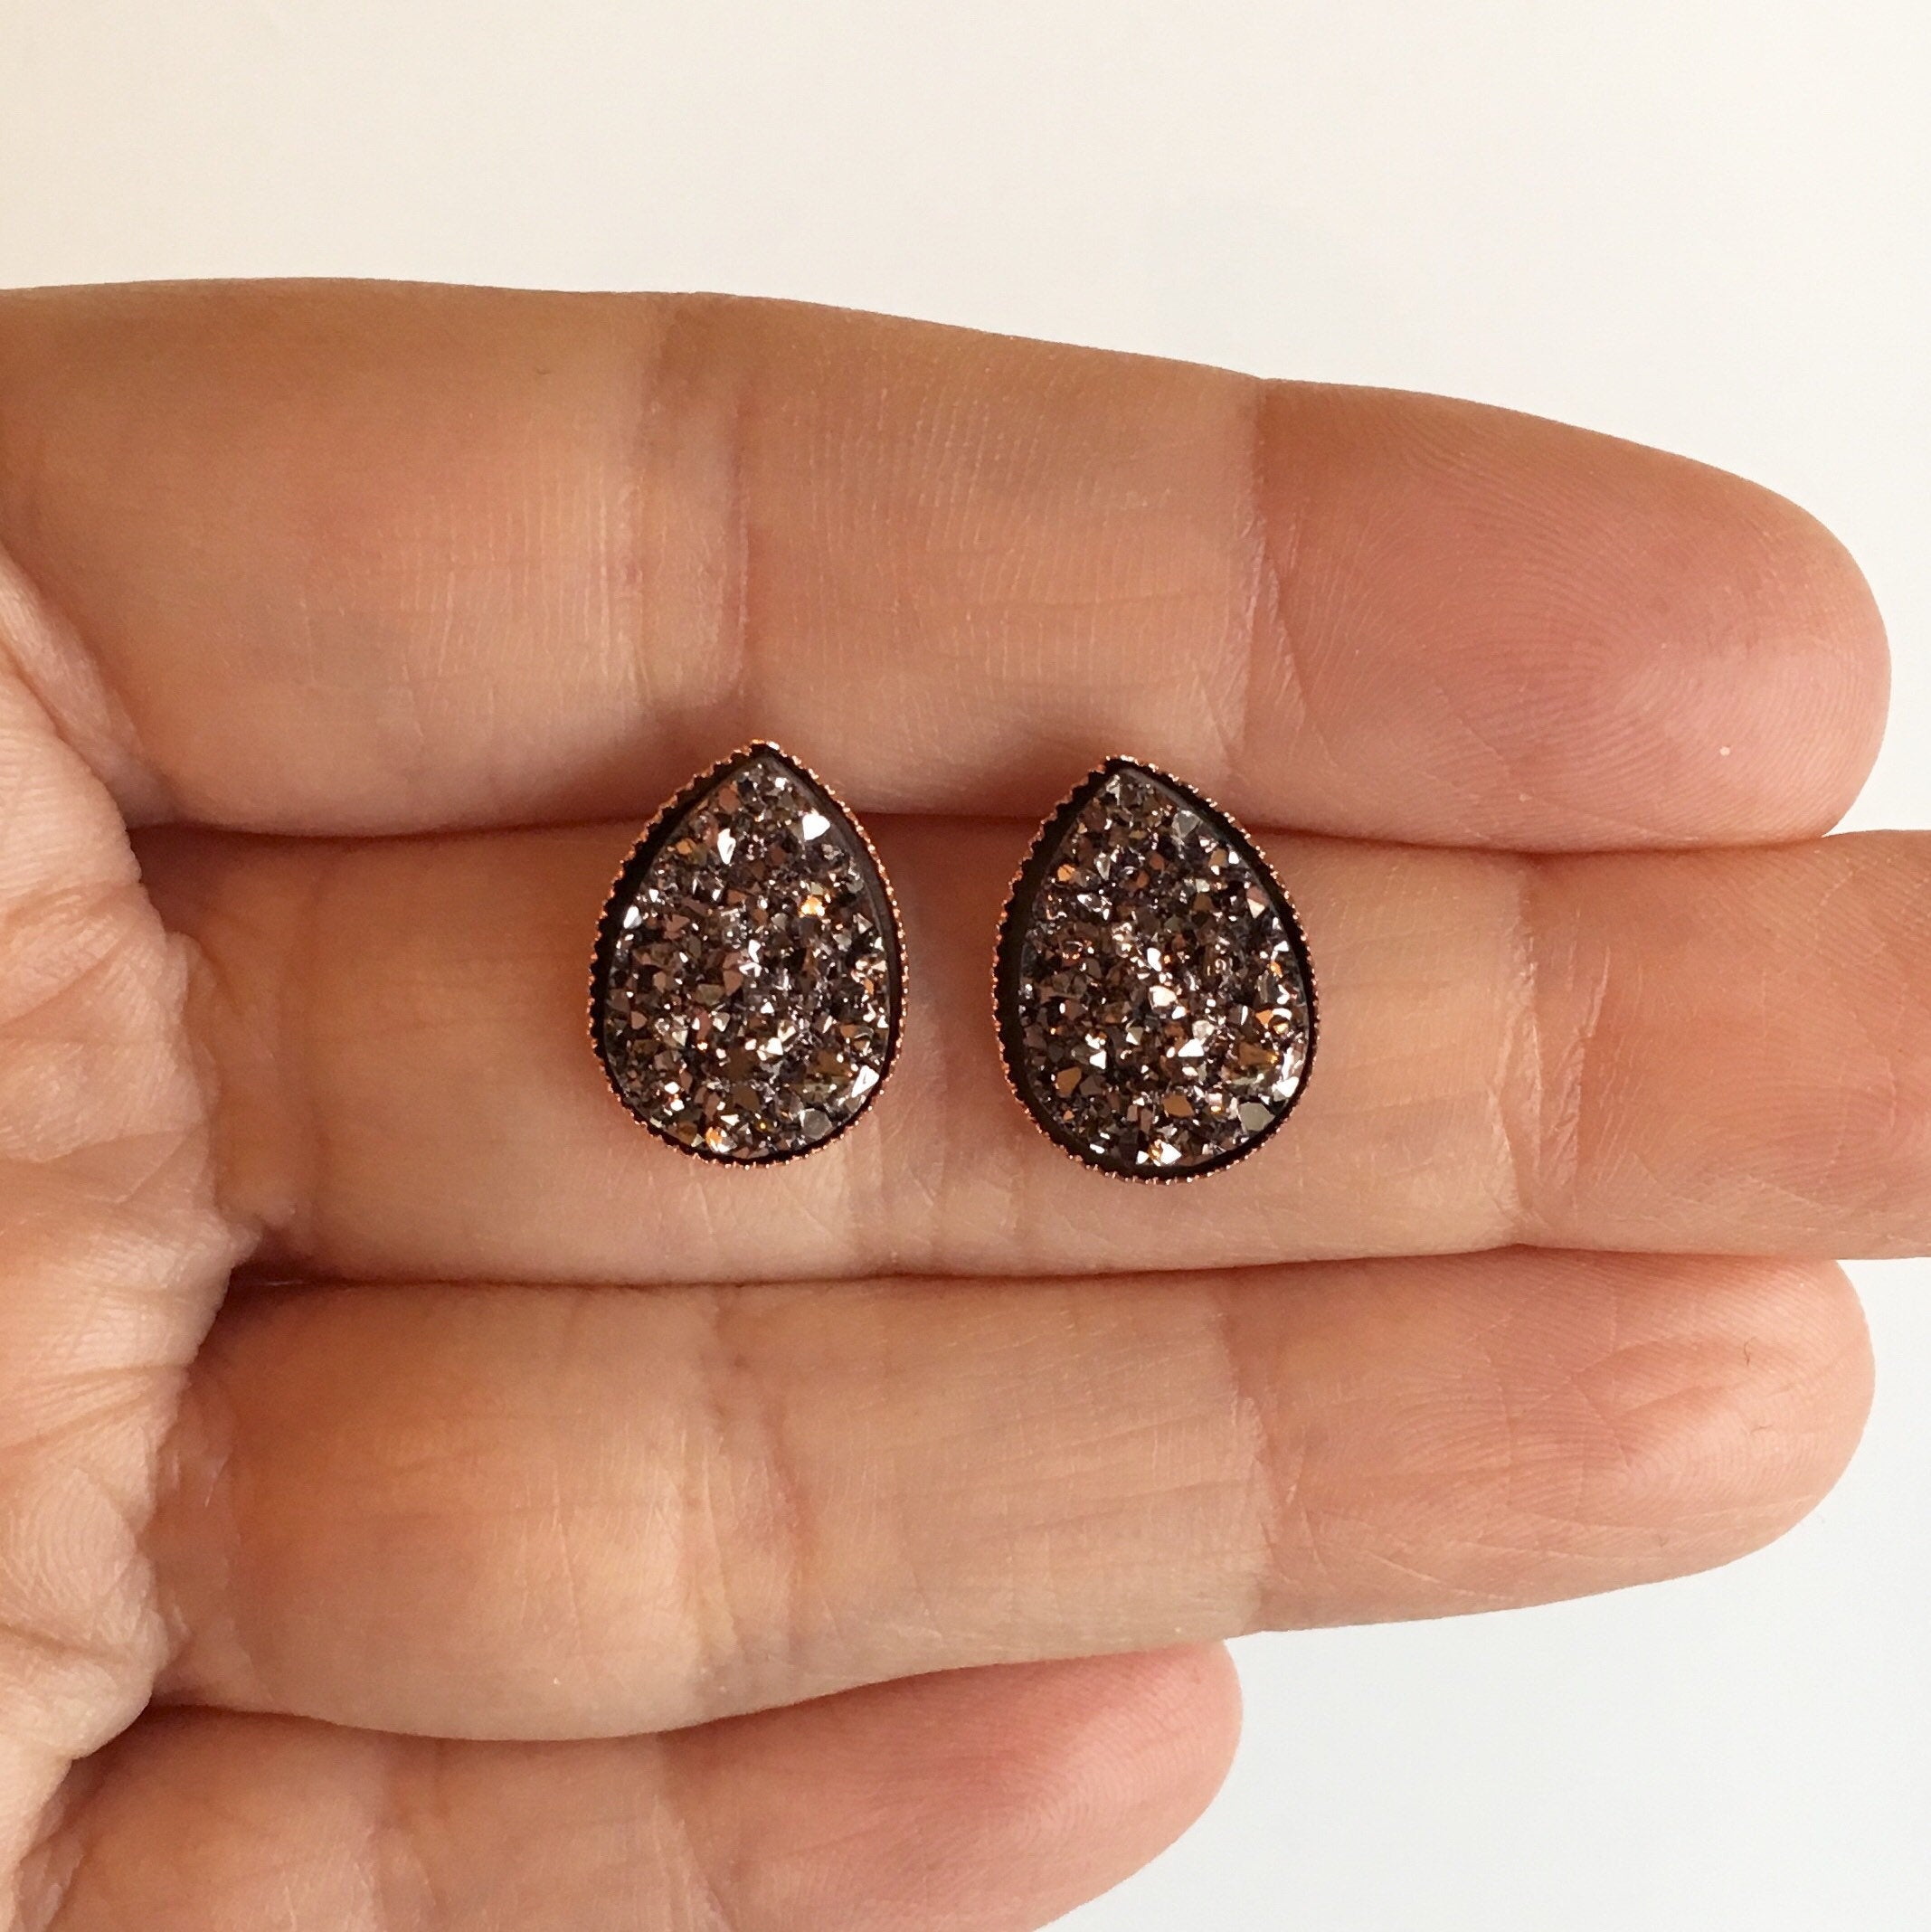 Hand holding Rose gold teardrop resin druzy stone stud earrings set in a rose gold color setting. 